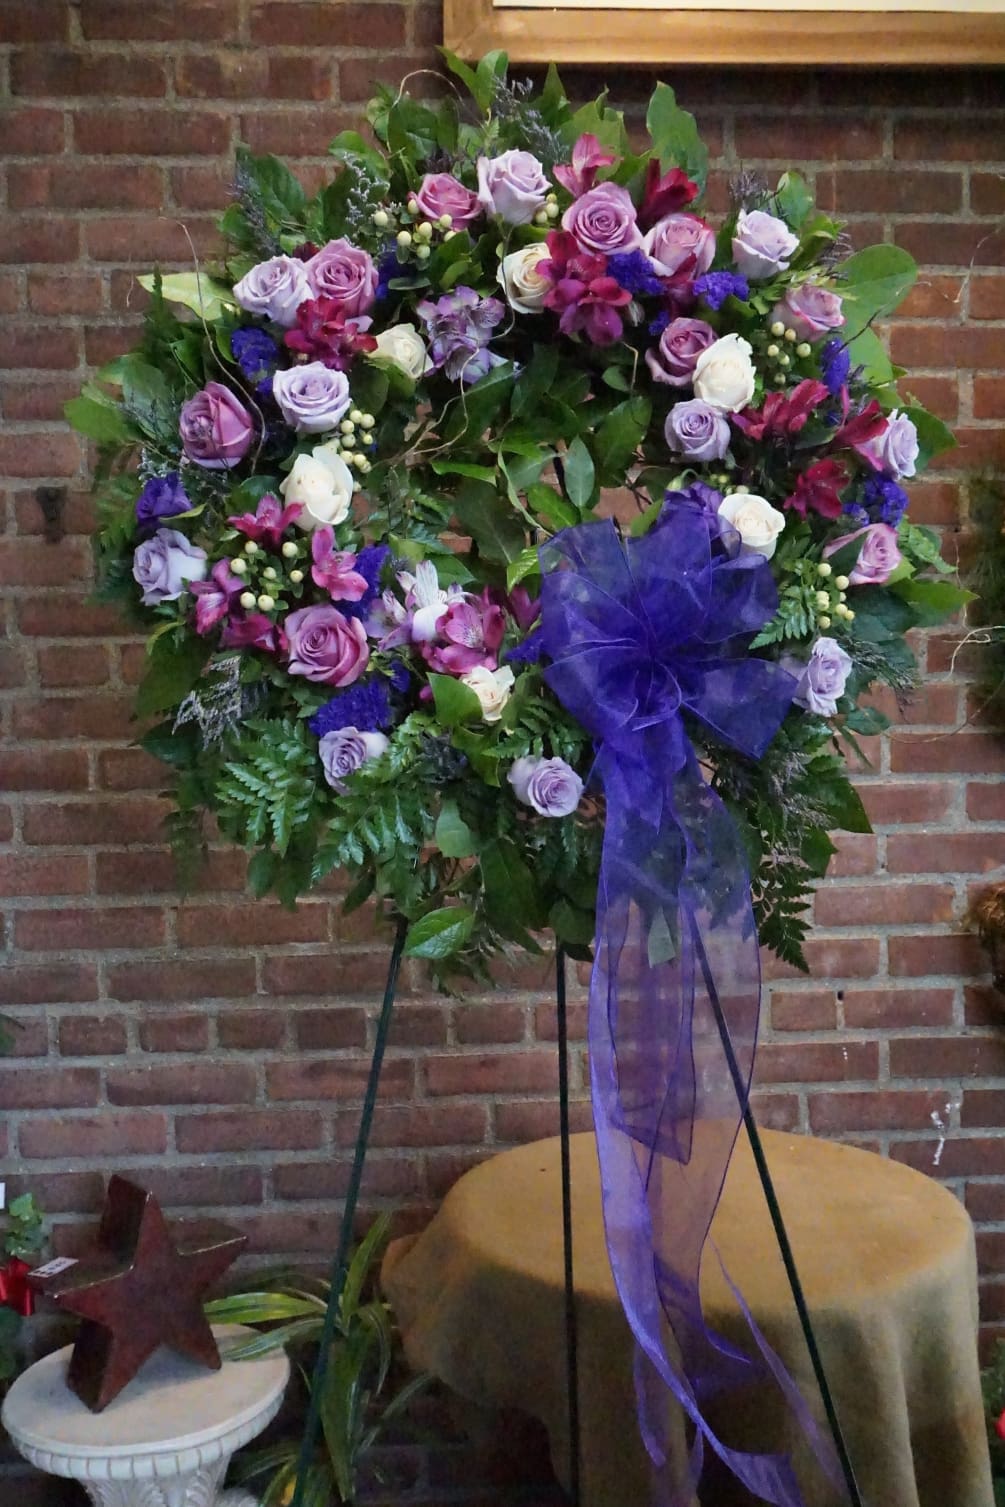 This beautiful sympathy wreath is designed with shades of purple flowers including